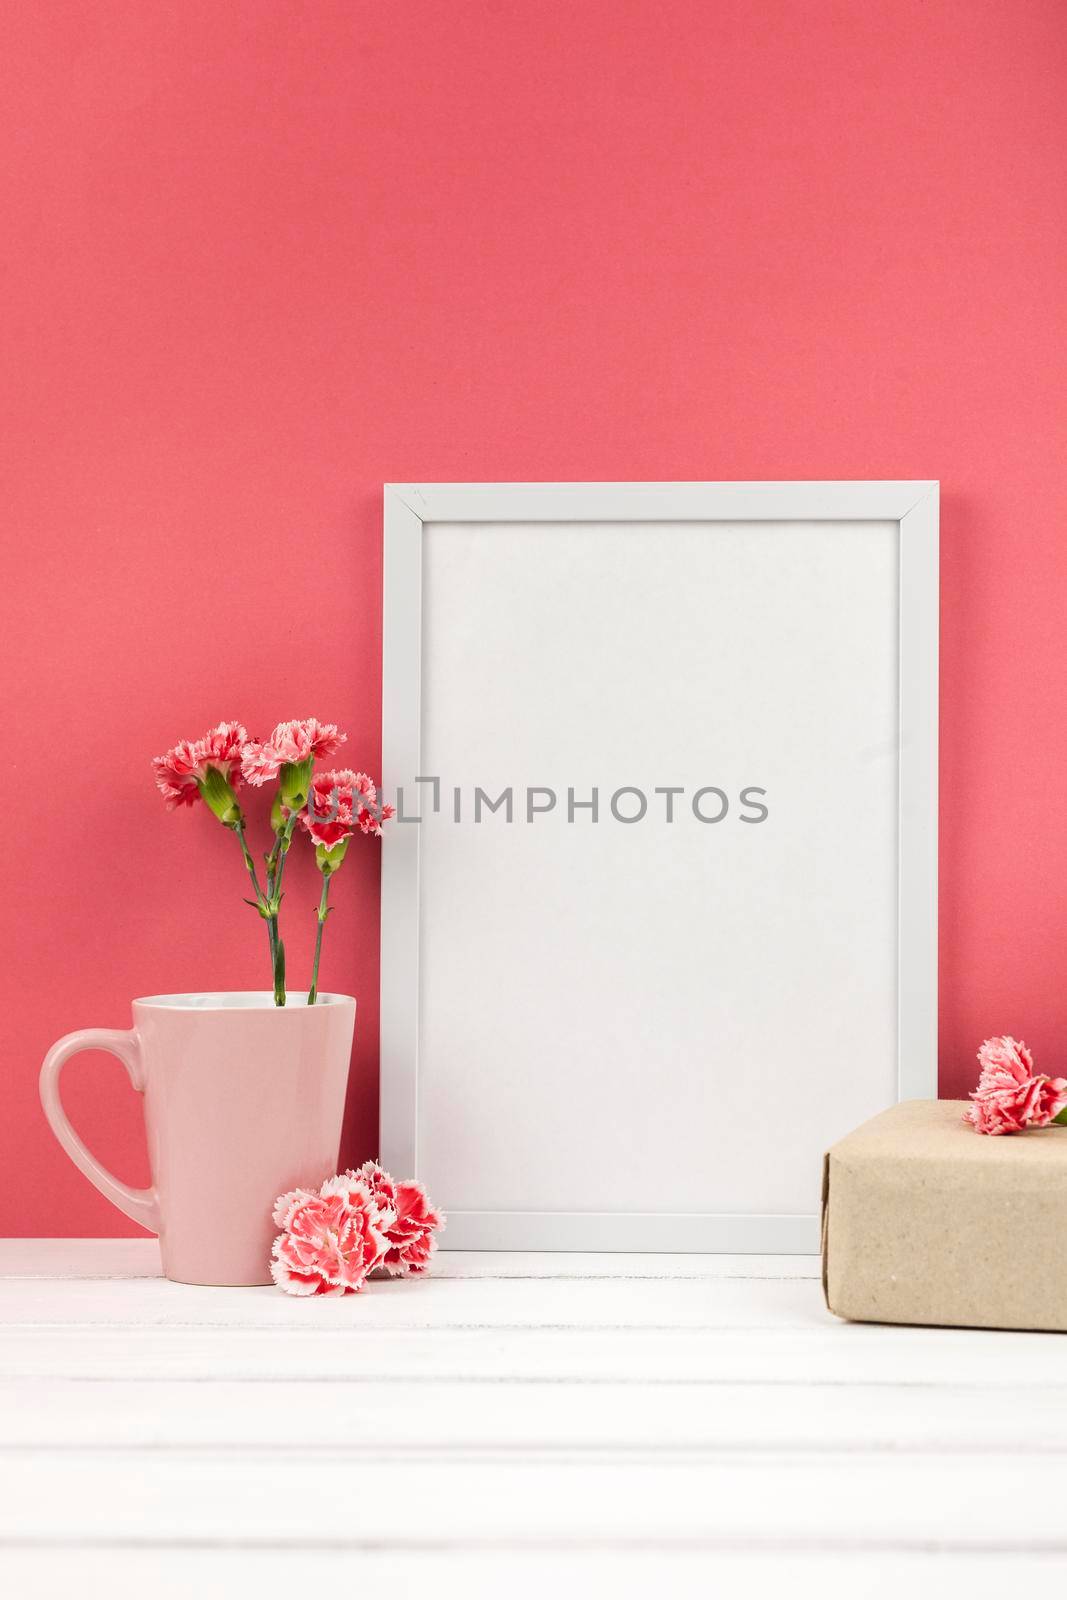 carnation flowers gift box cup white empty frame table. High resolution photo